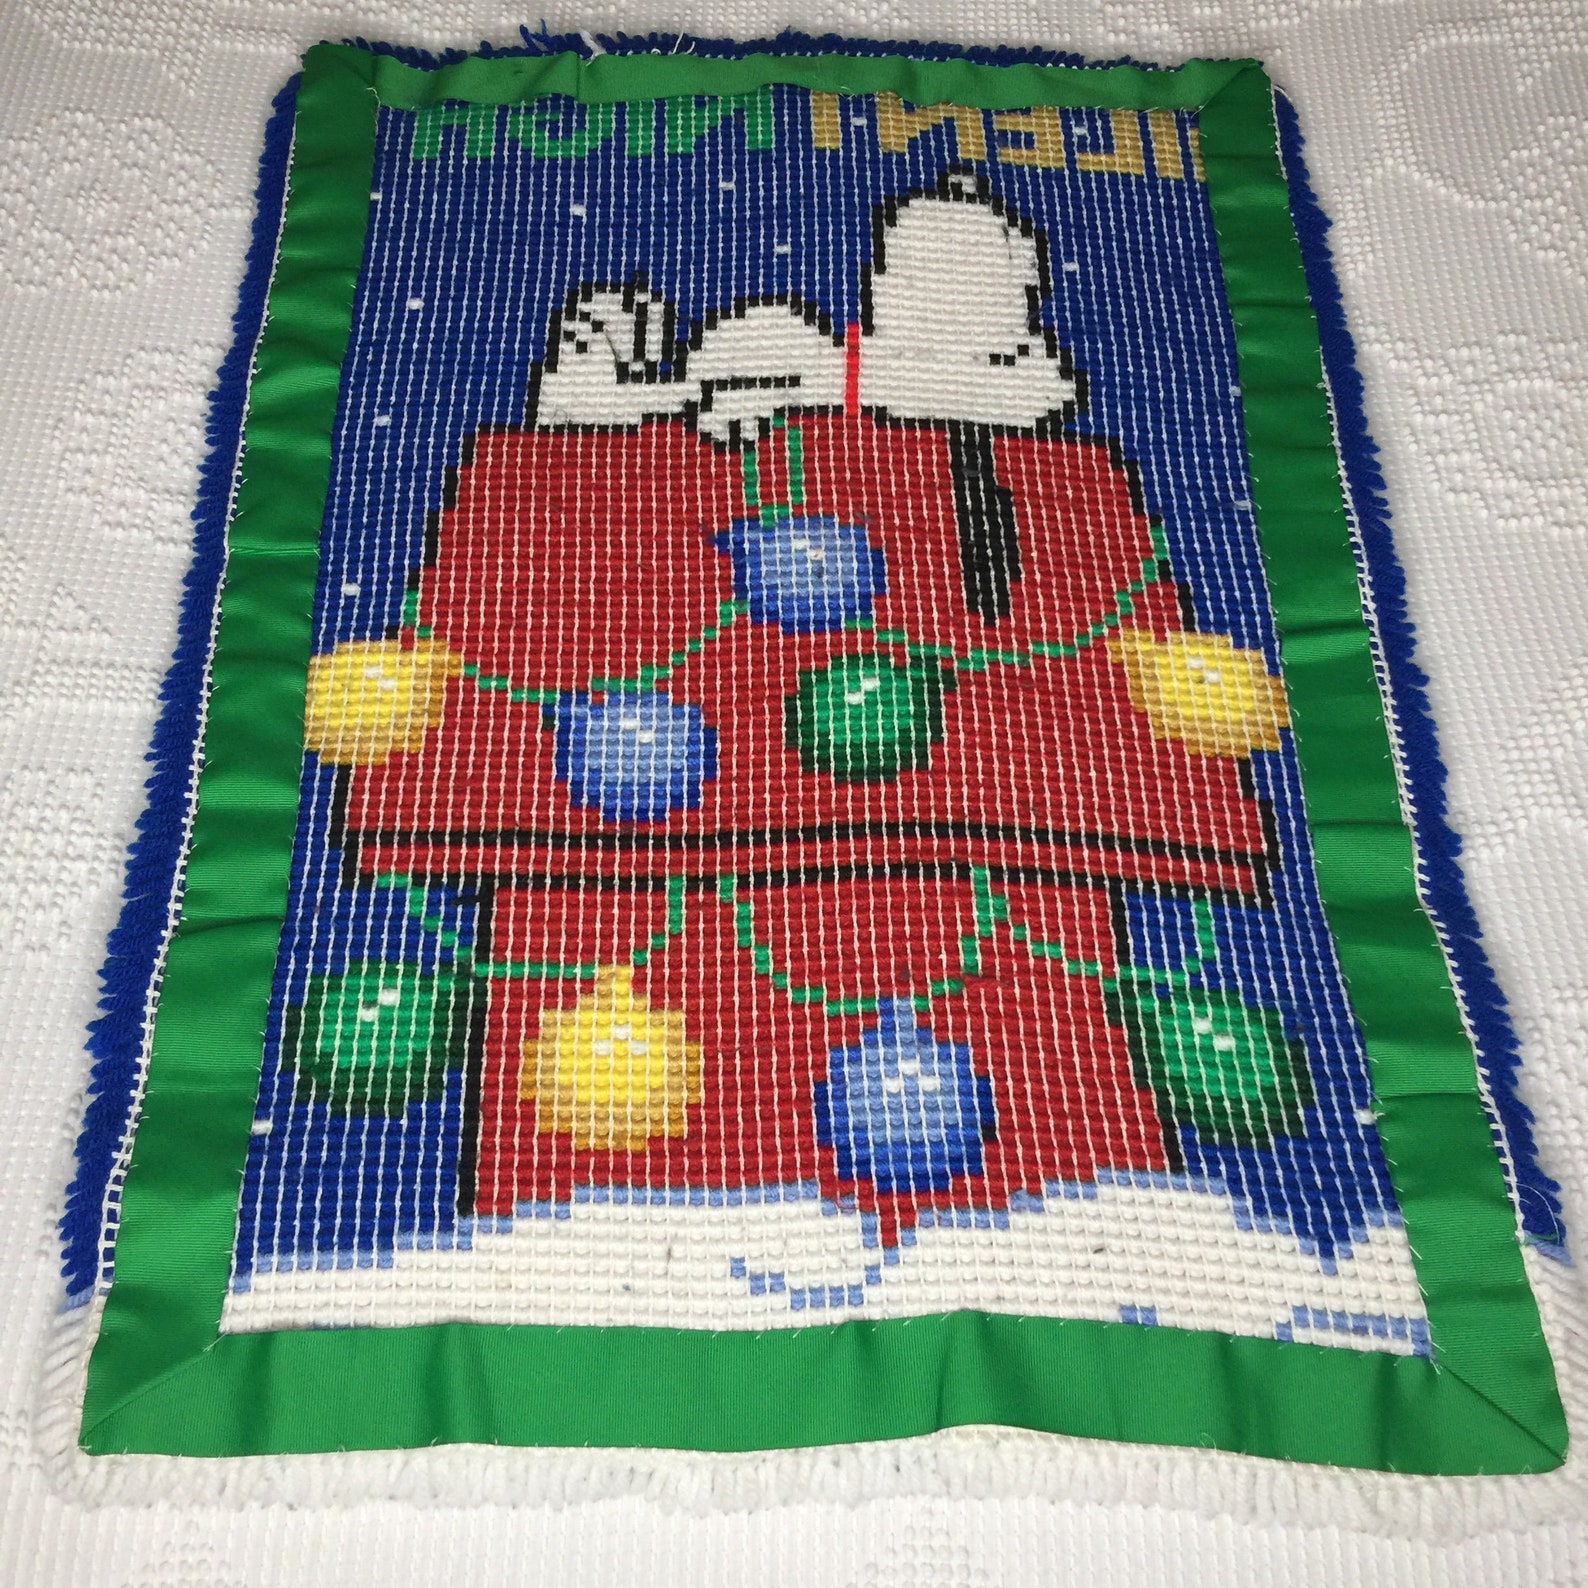 Snoopy Completed Hooked Rug Silent Night Christmas Theme 28x20 | Etsy